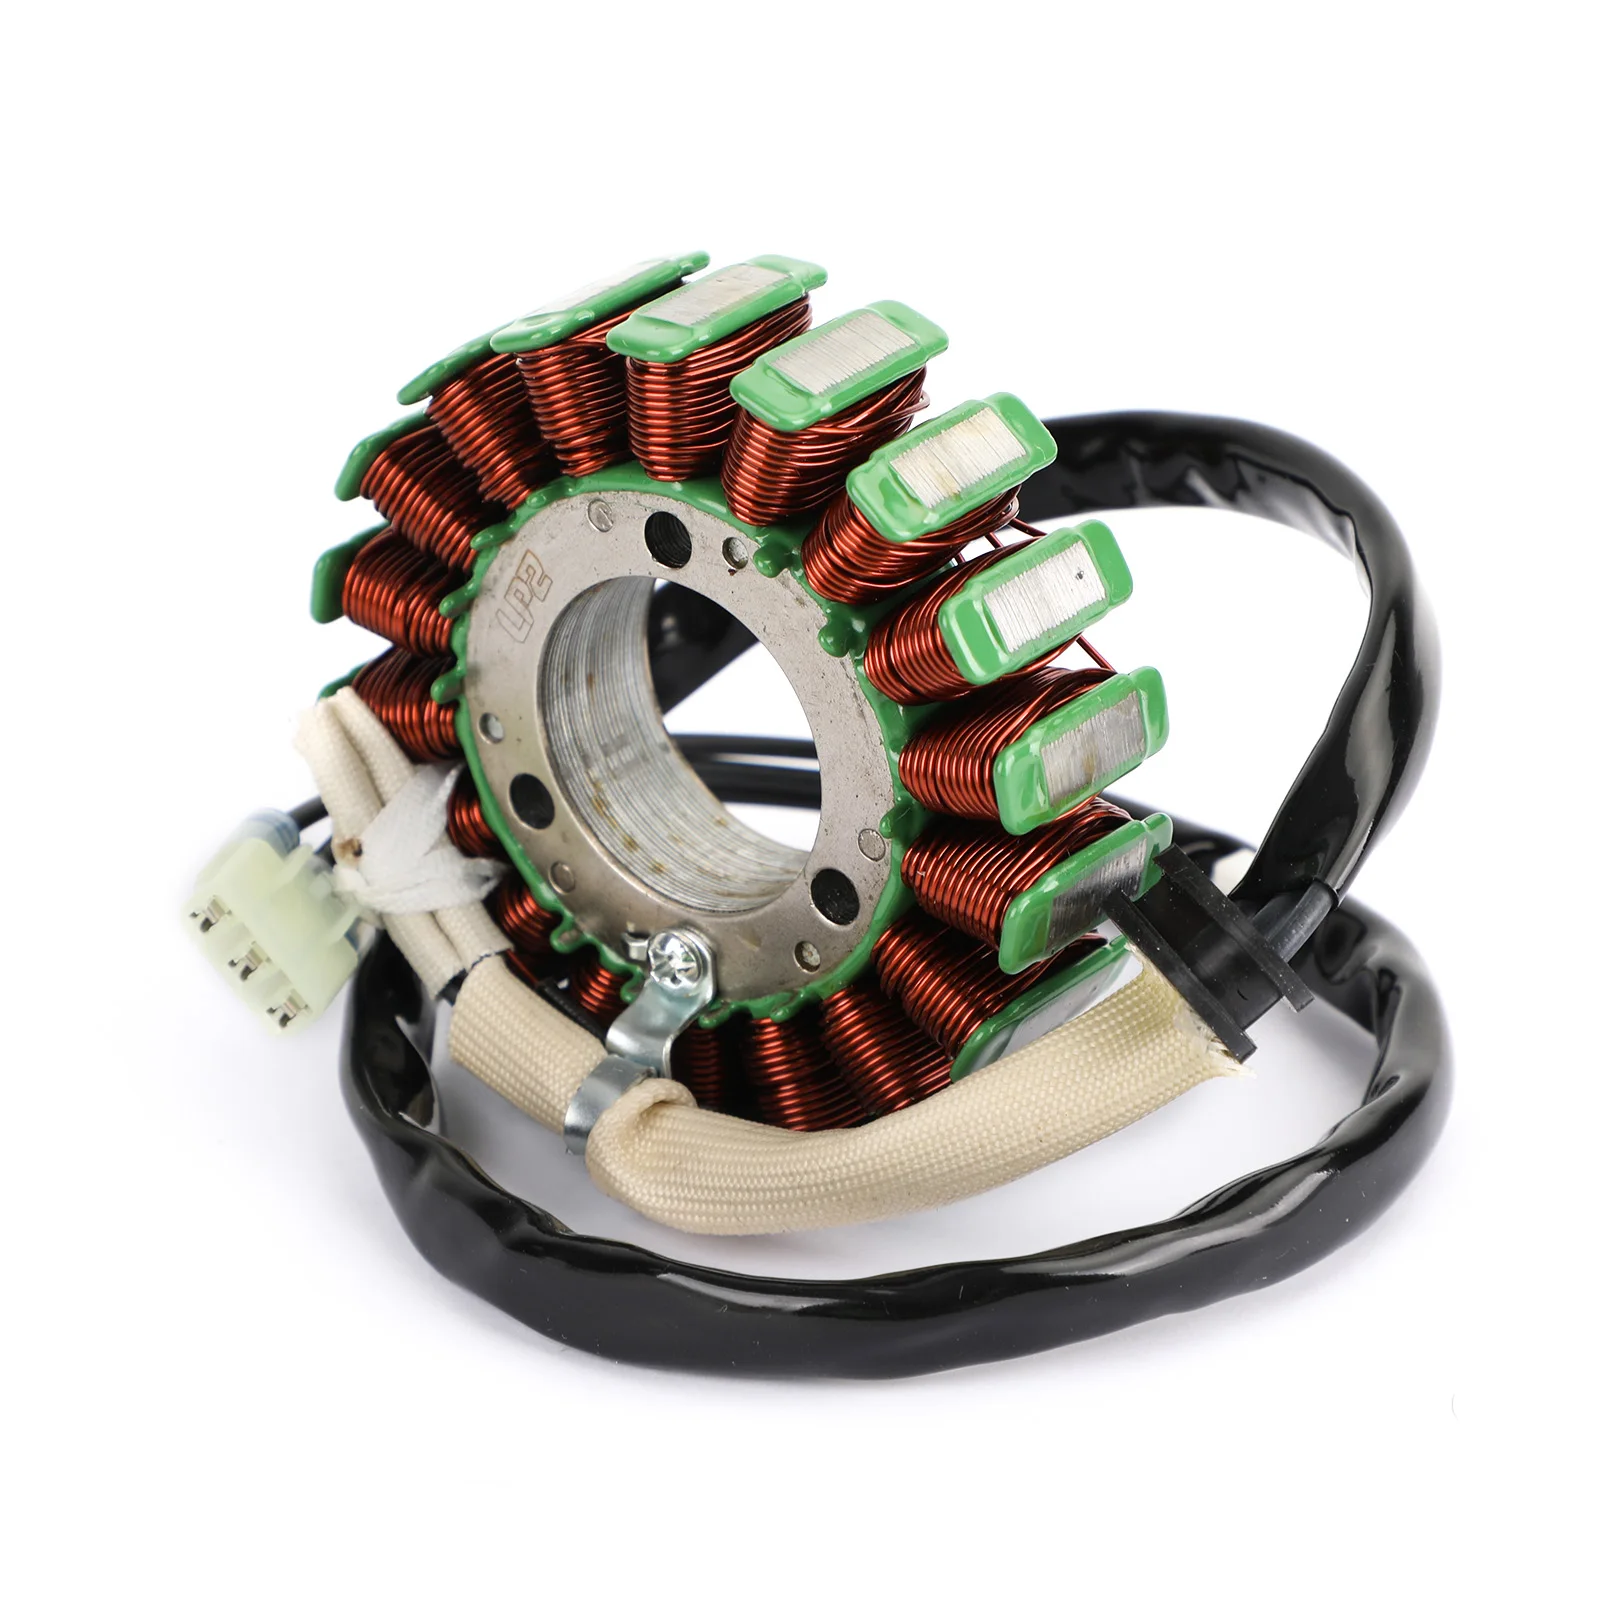 

Areyourshop Magneto Generator Engine Stator Coil Fit for Beta RR 4T 350 390 430 480 Racing 2015 2016 2017 2018 2019 006101200000